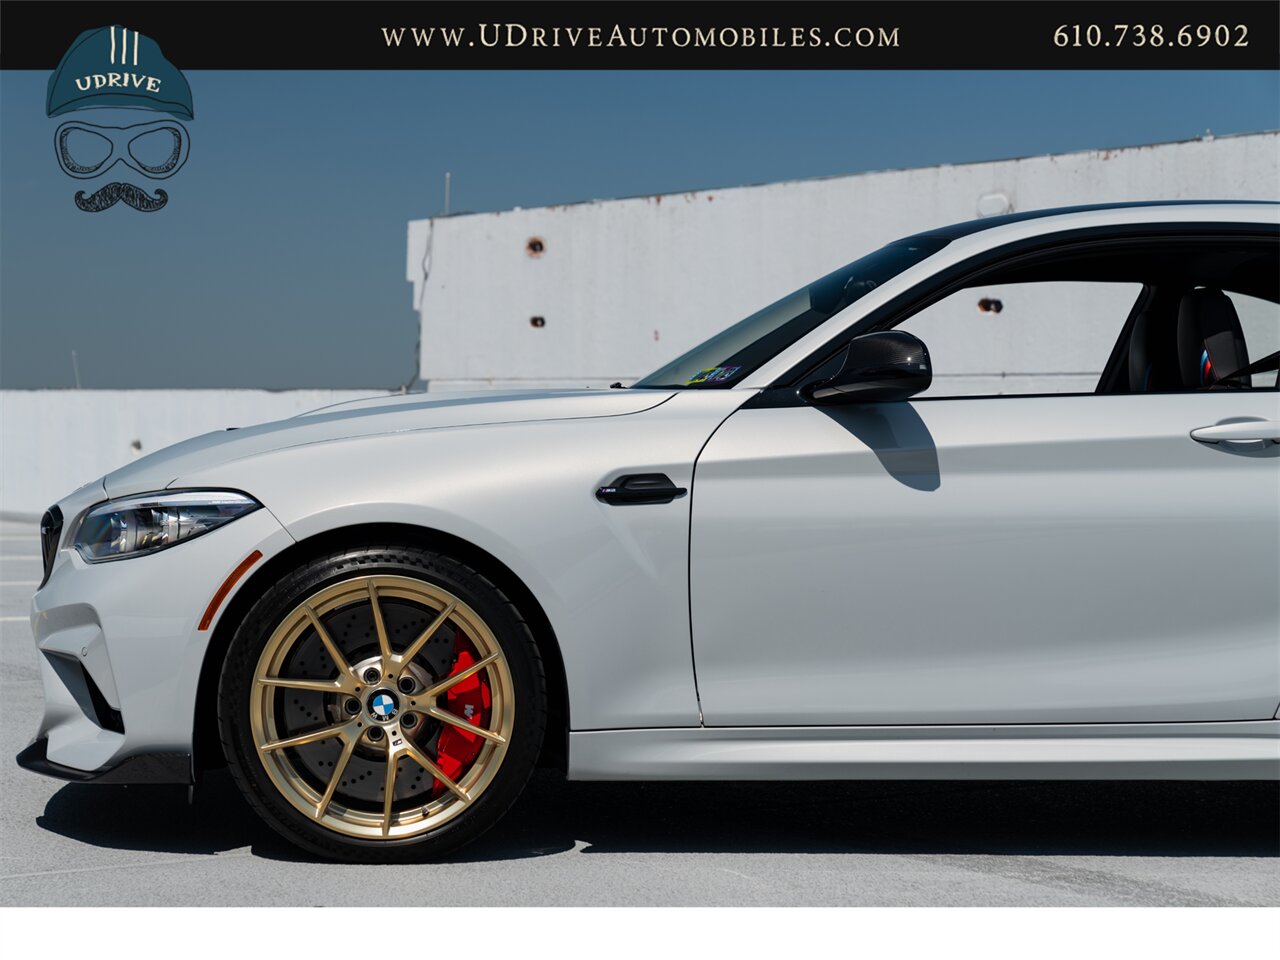 2020 BMW M2 CS  M2 CS 6 Speed Manual 2k Miles Full Body PPF Factory Warranty until 2025 - Photo 9 - West Chester, PA 19382